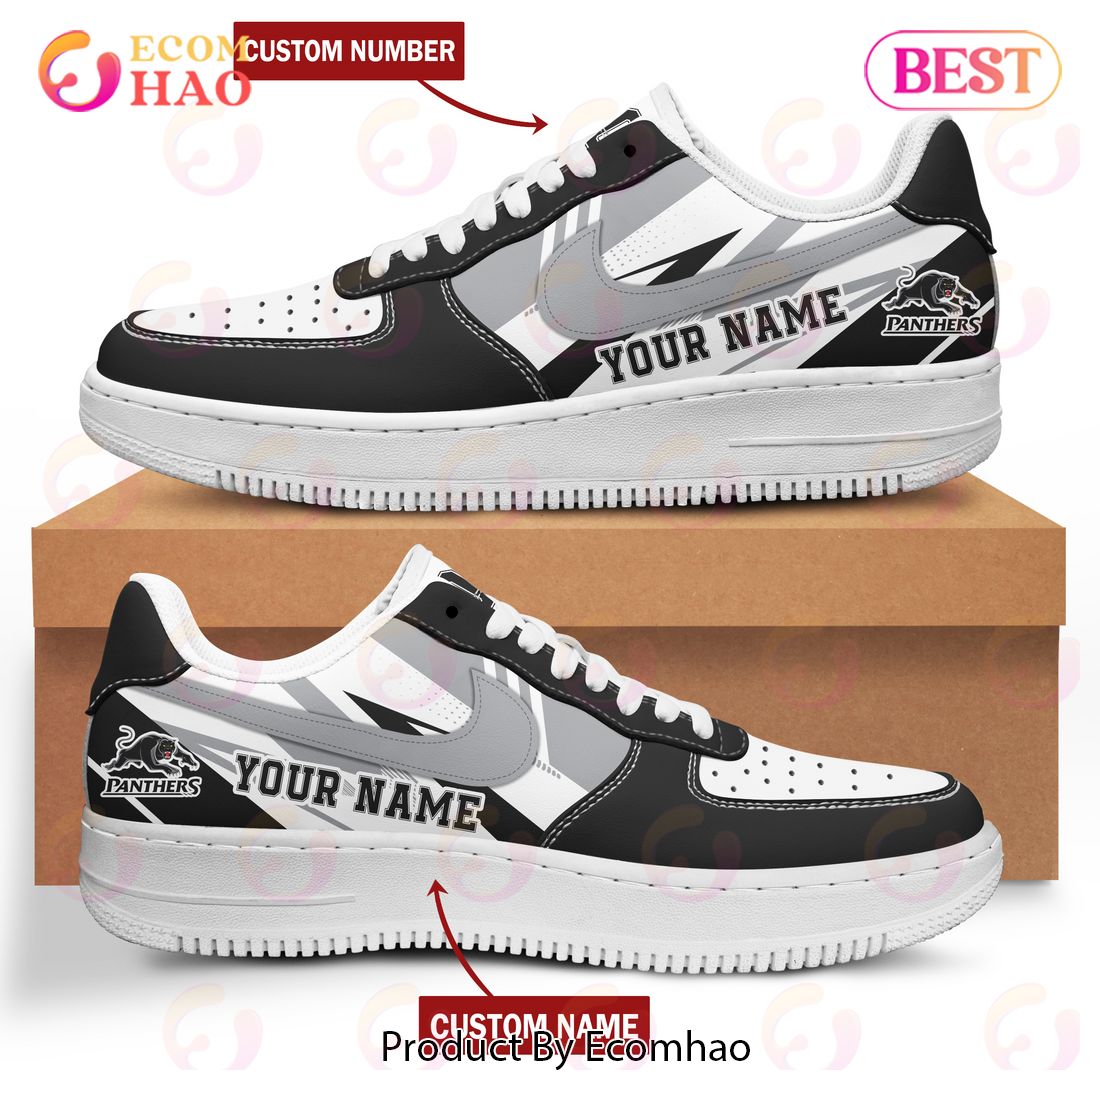 NRL Penrith Panthers Air Force 1 Custom Name - Ecomhao Store